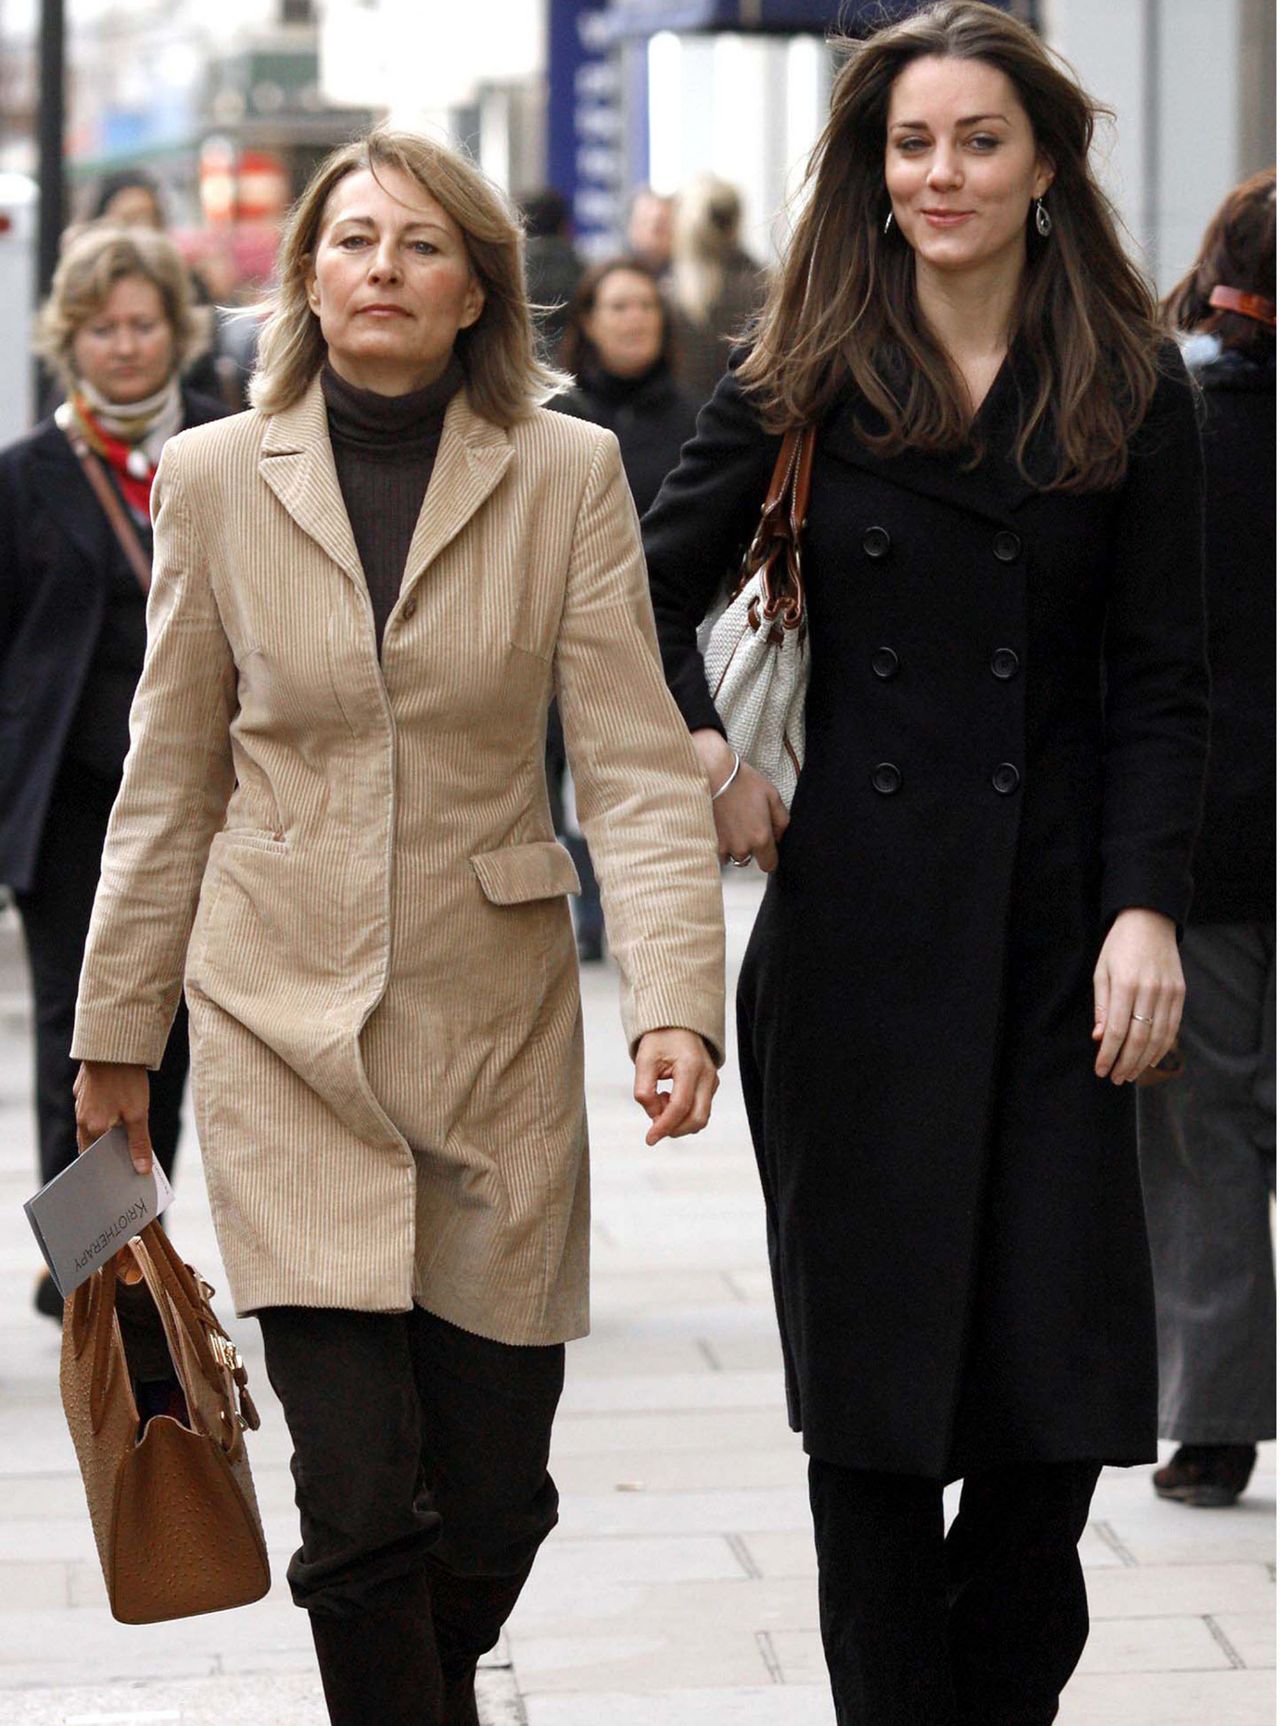 Carole Middleton's Style File | Woman & Home